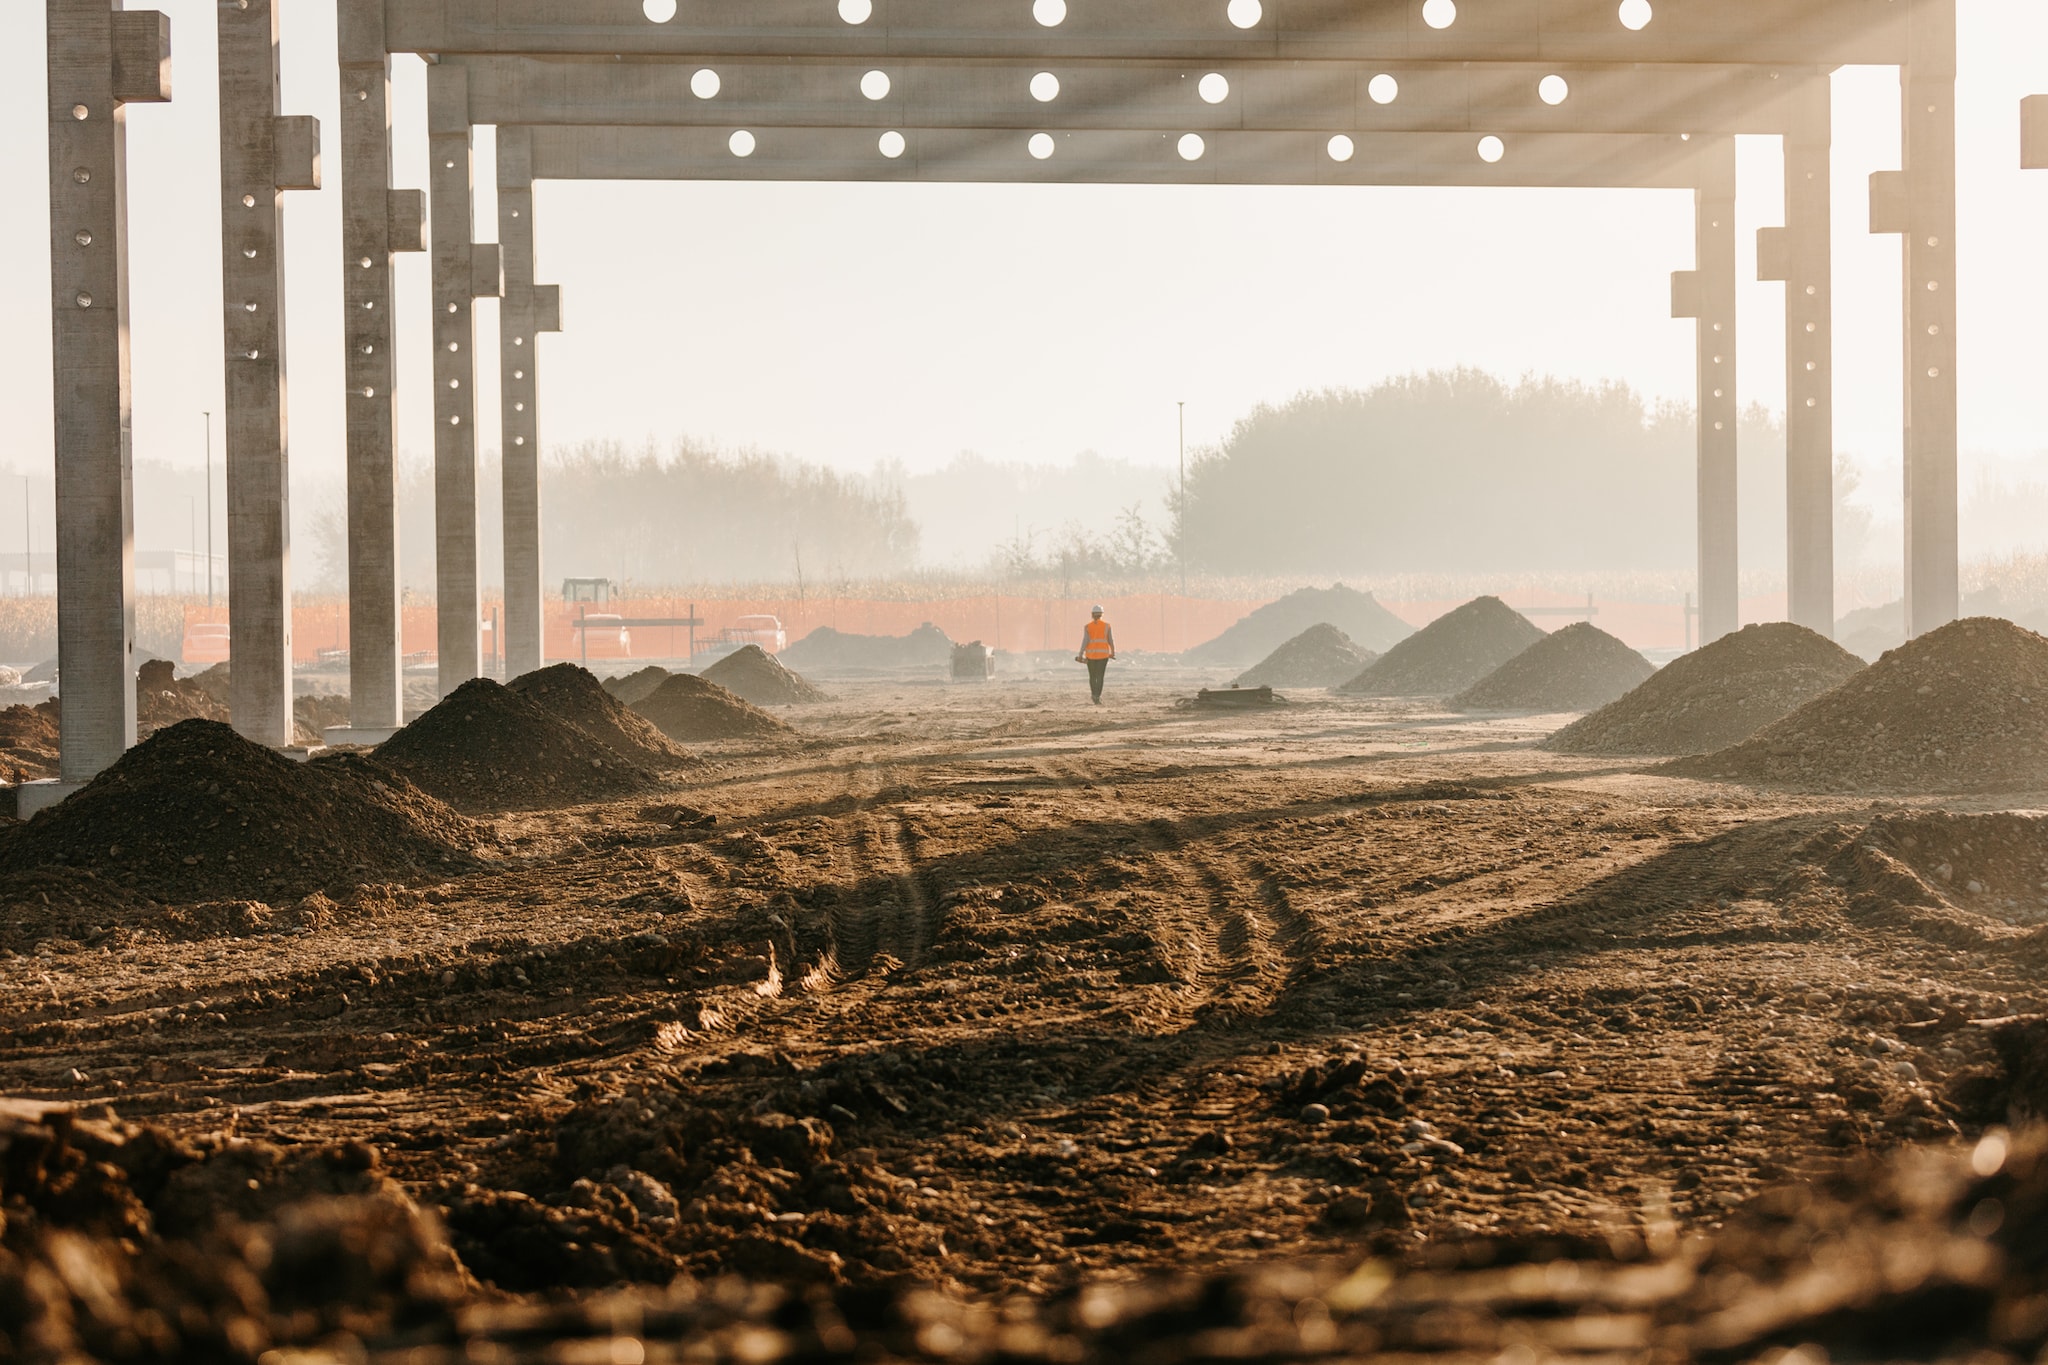 A construction site with a worker in the background and dust flying around.